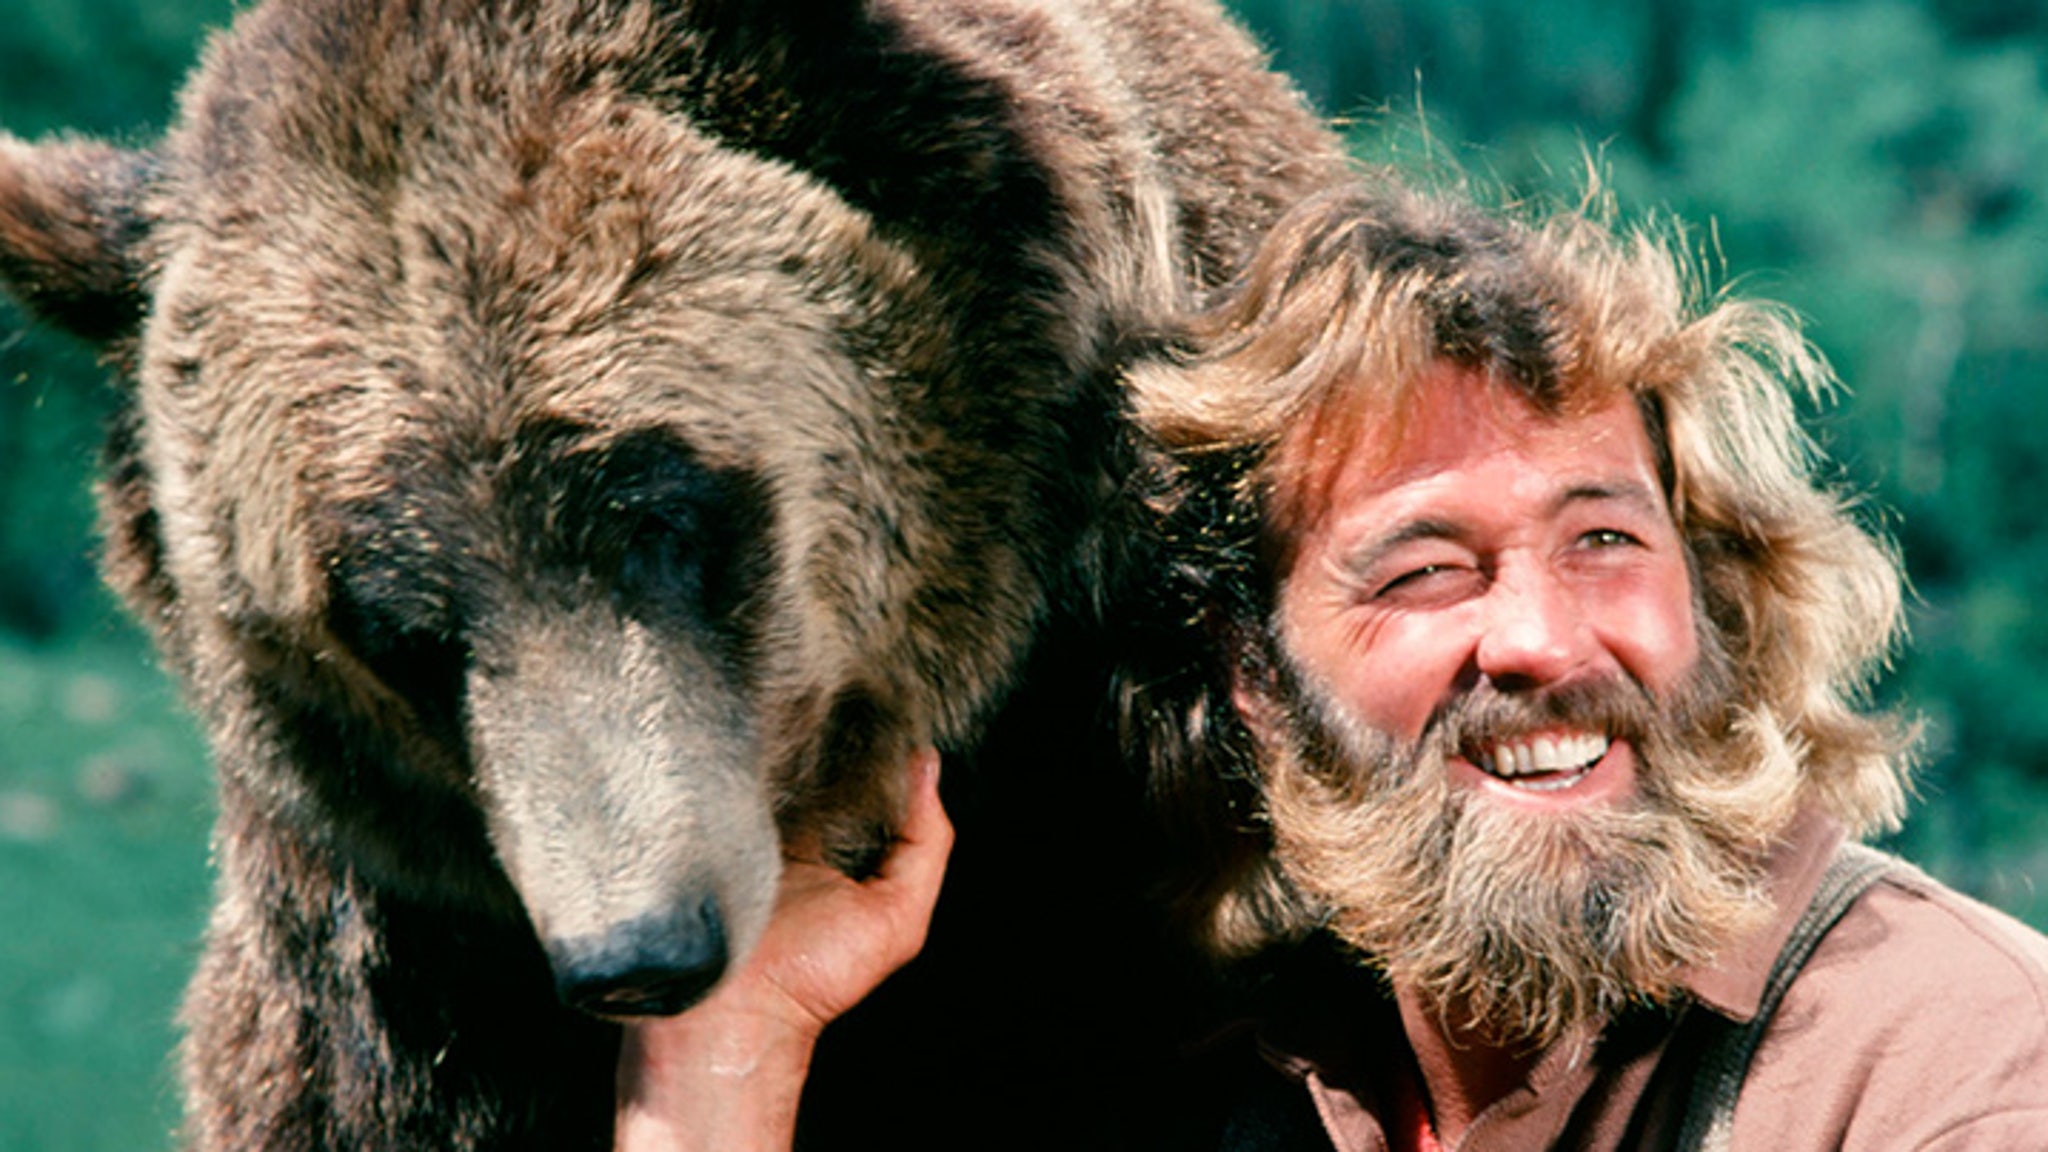 Grizzly adams images